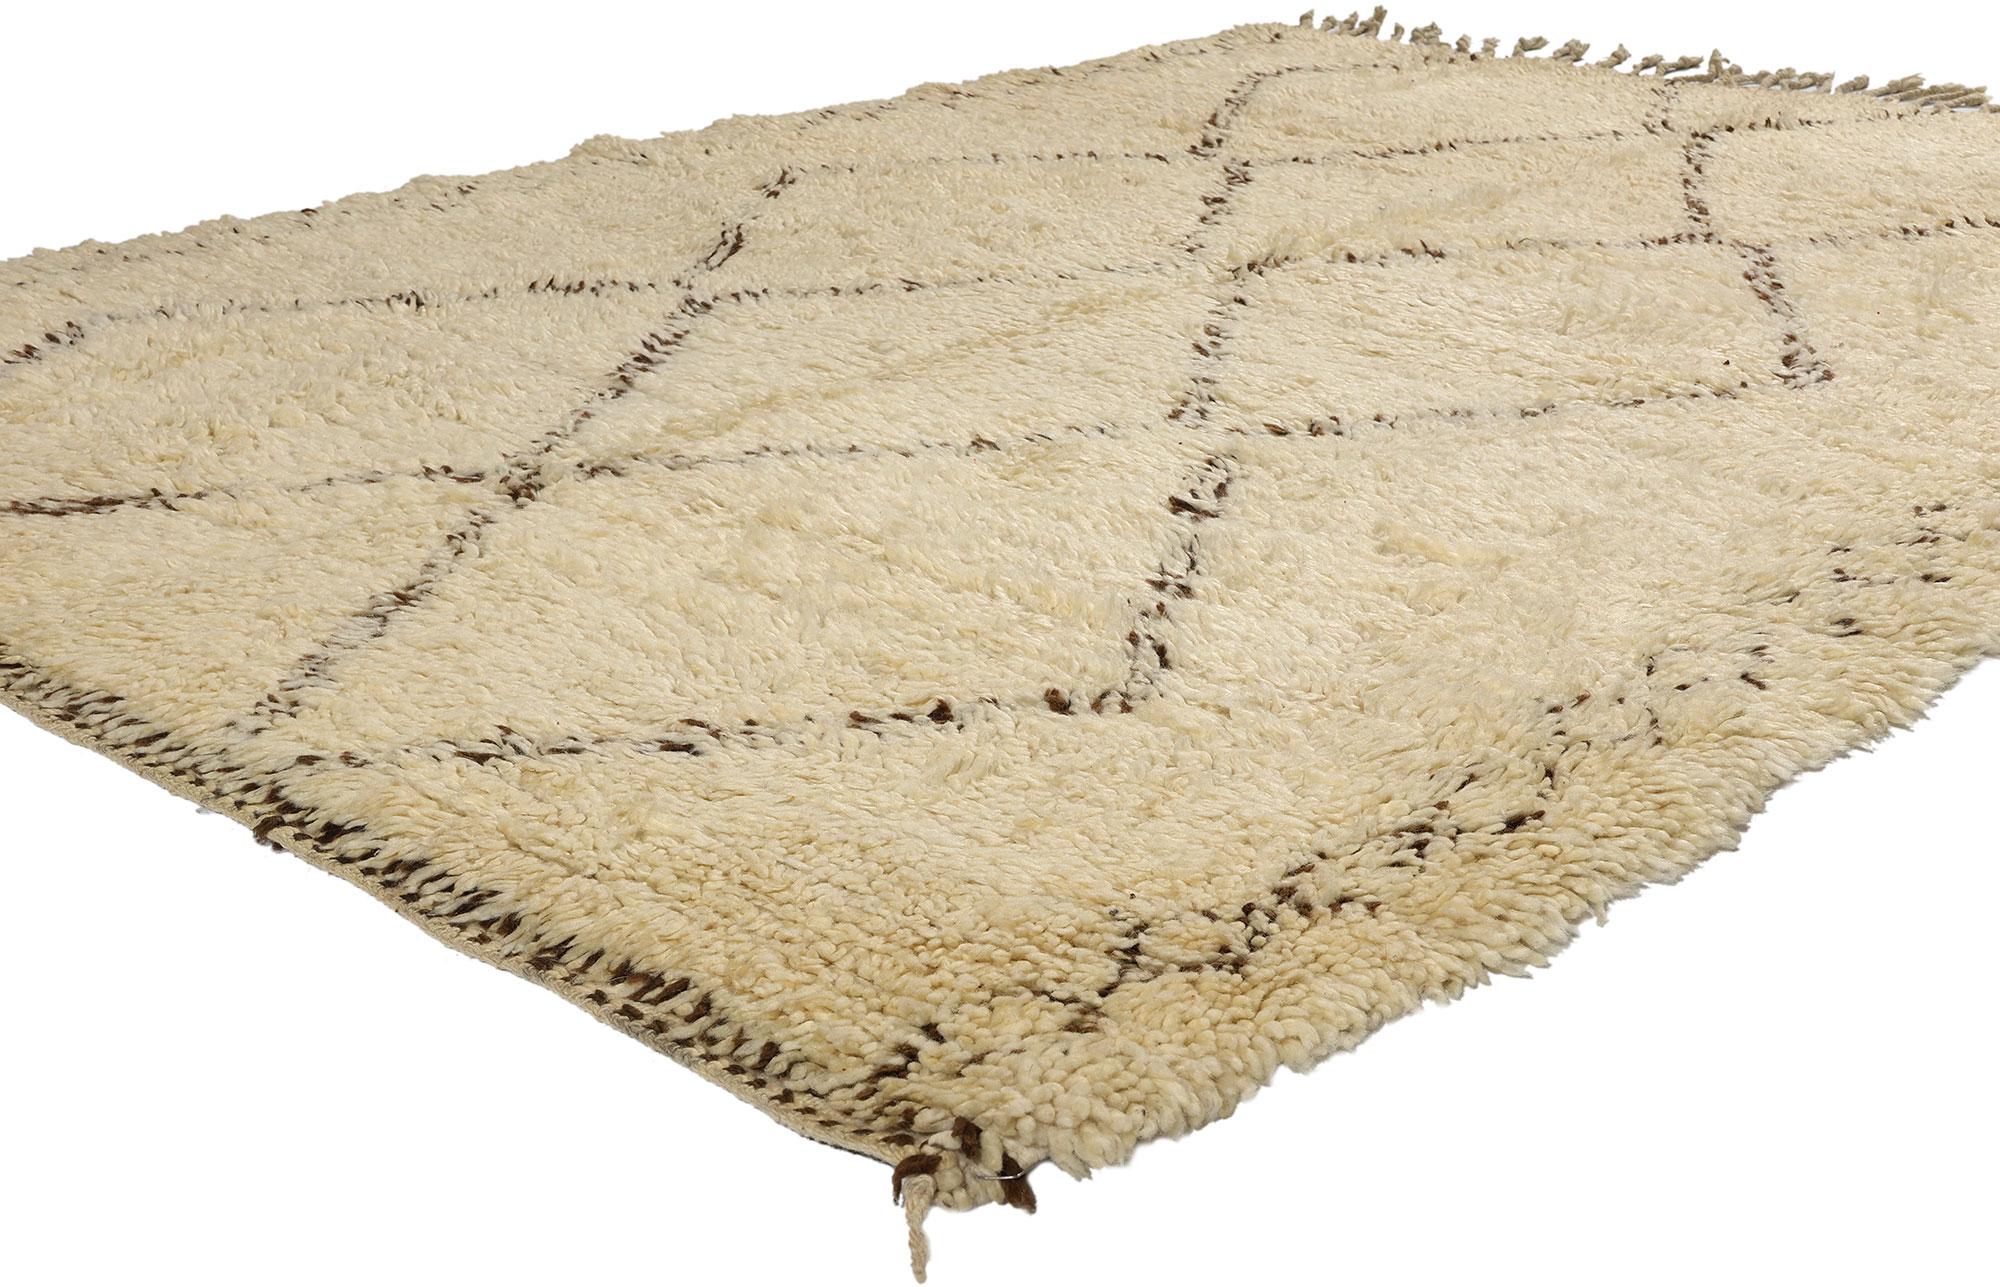 21748 Vintage Moroccan Beni Ourain Rug, 05'07 x 07'05. Hailing from the esteemed Beni Ourain tribe in Morocco, these finely crafted rugs embody a profound respect for tradition, evident in their meticulous craftsmanship. Crafted from untreated